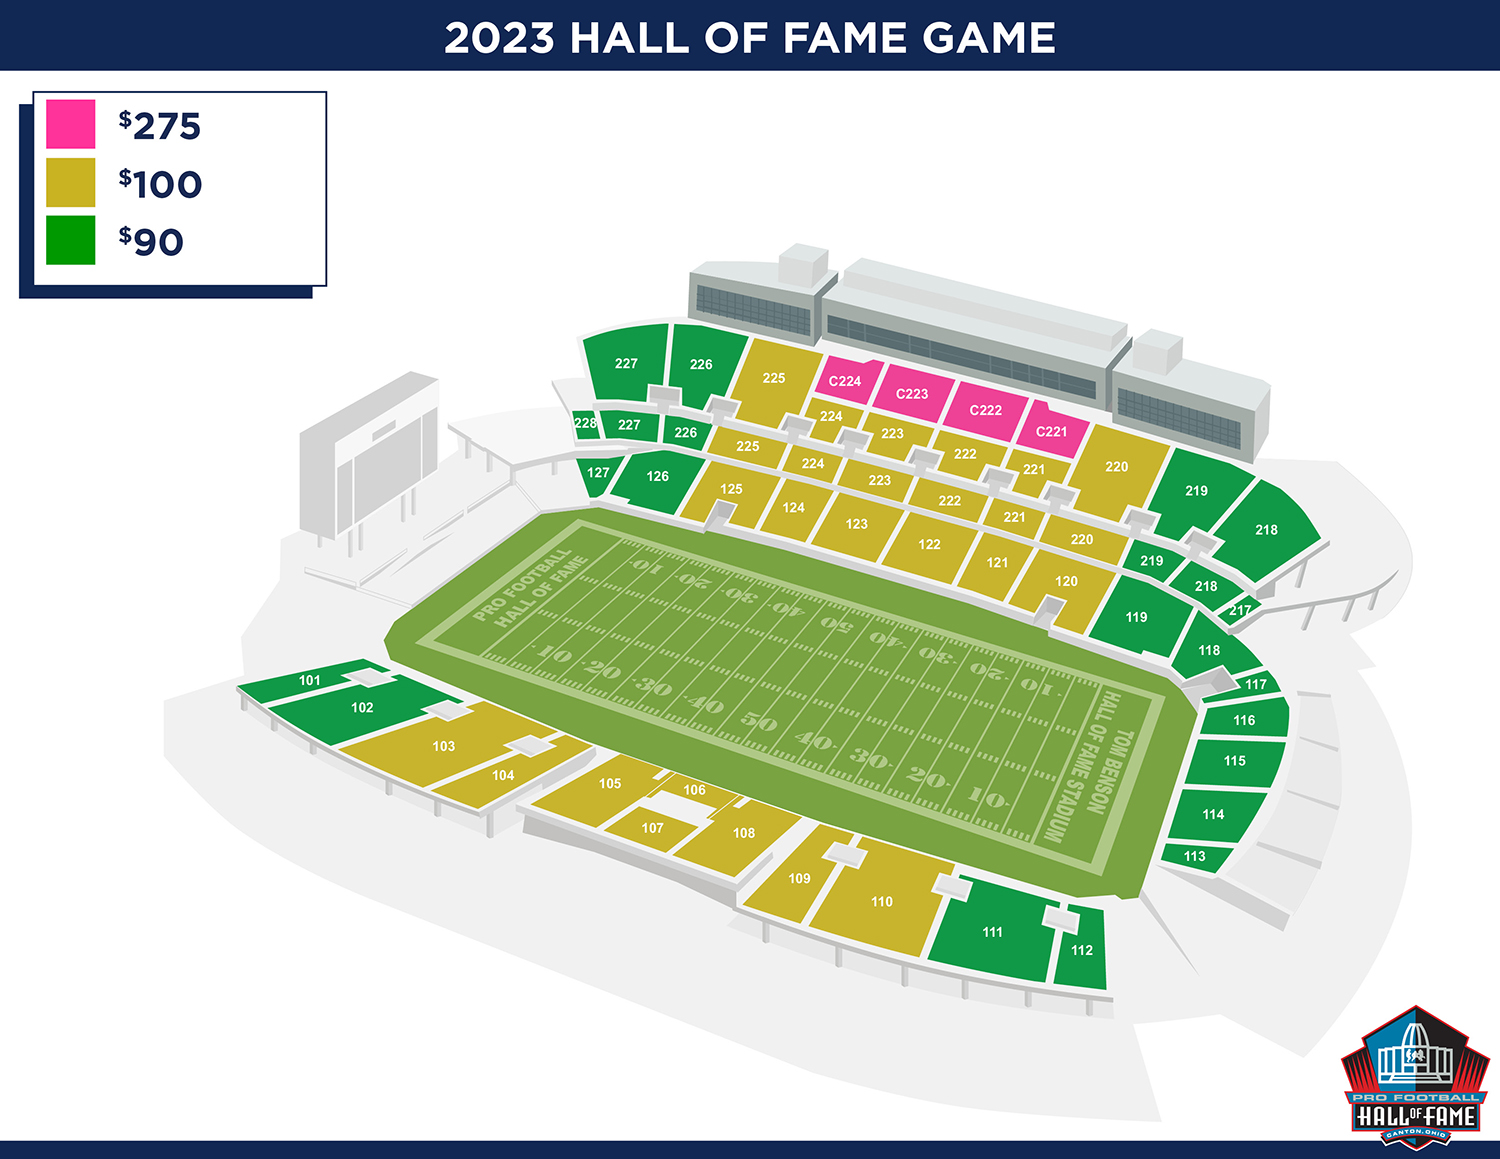 Pro Football Hall of Fame Game seating chart with prices.